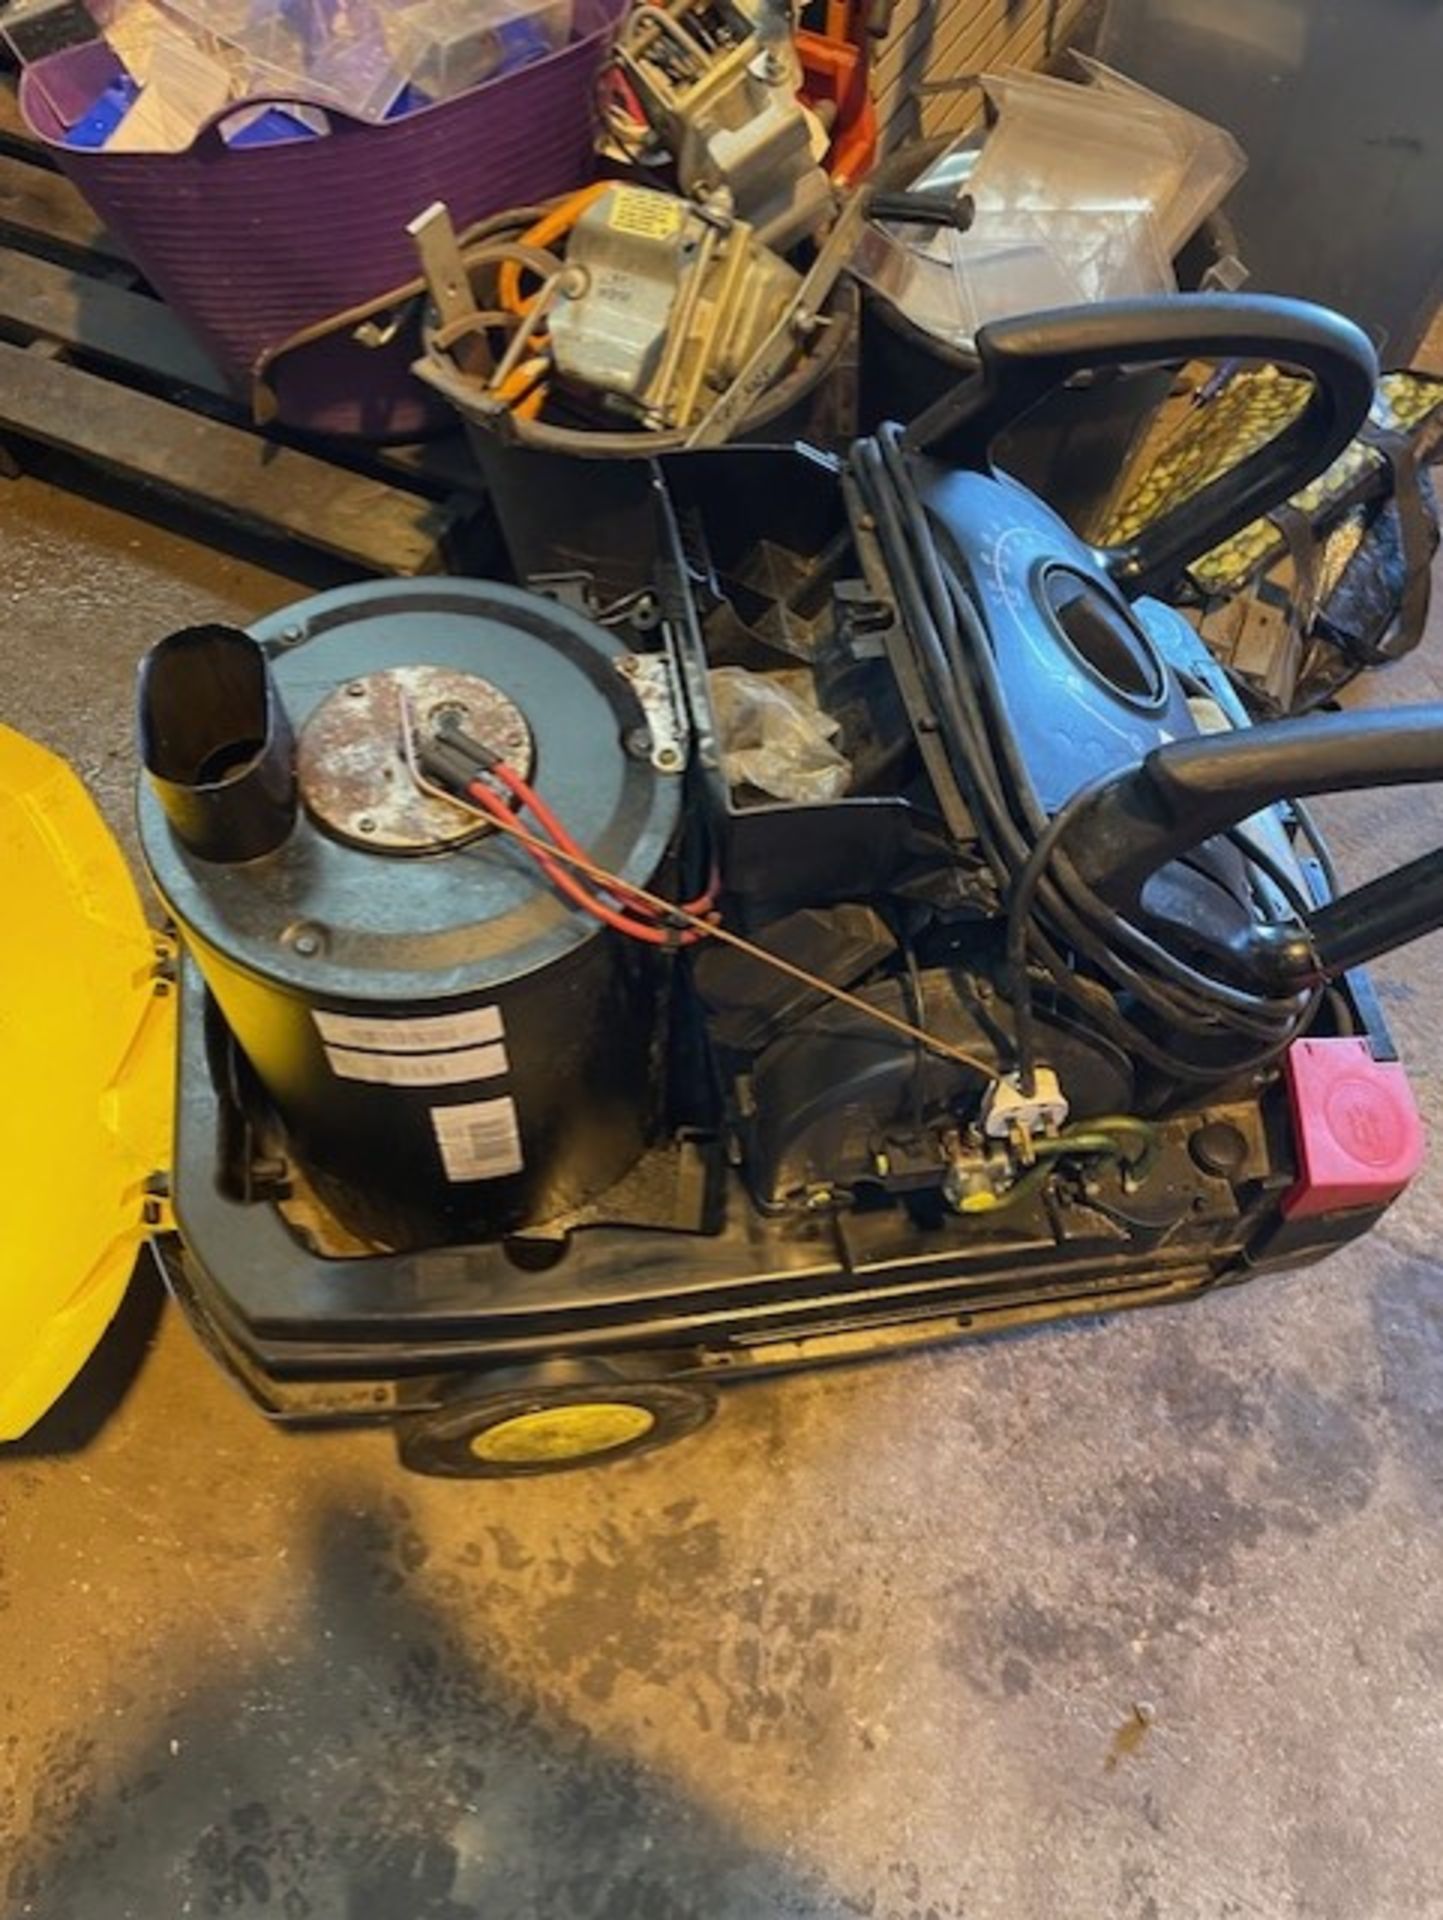 Karcher hot and cold pressure washer hds551 c model it’s in good condition still comes with hose and - Bild 8 aus 10